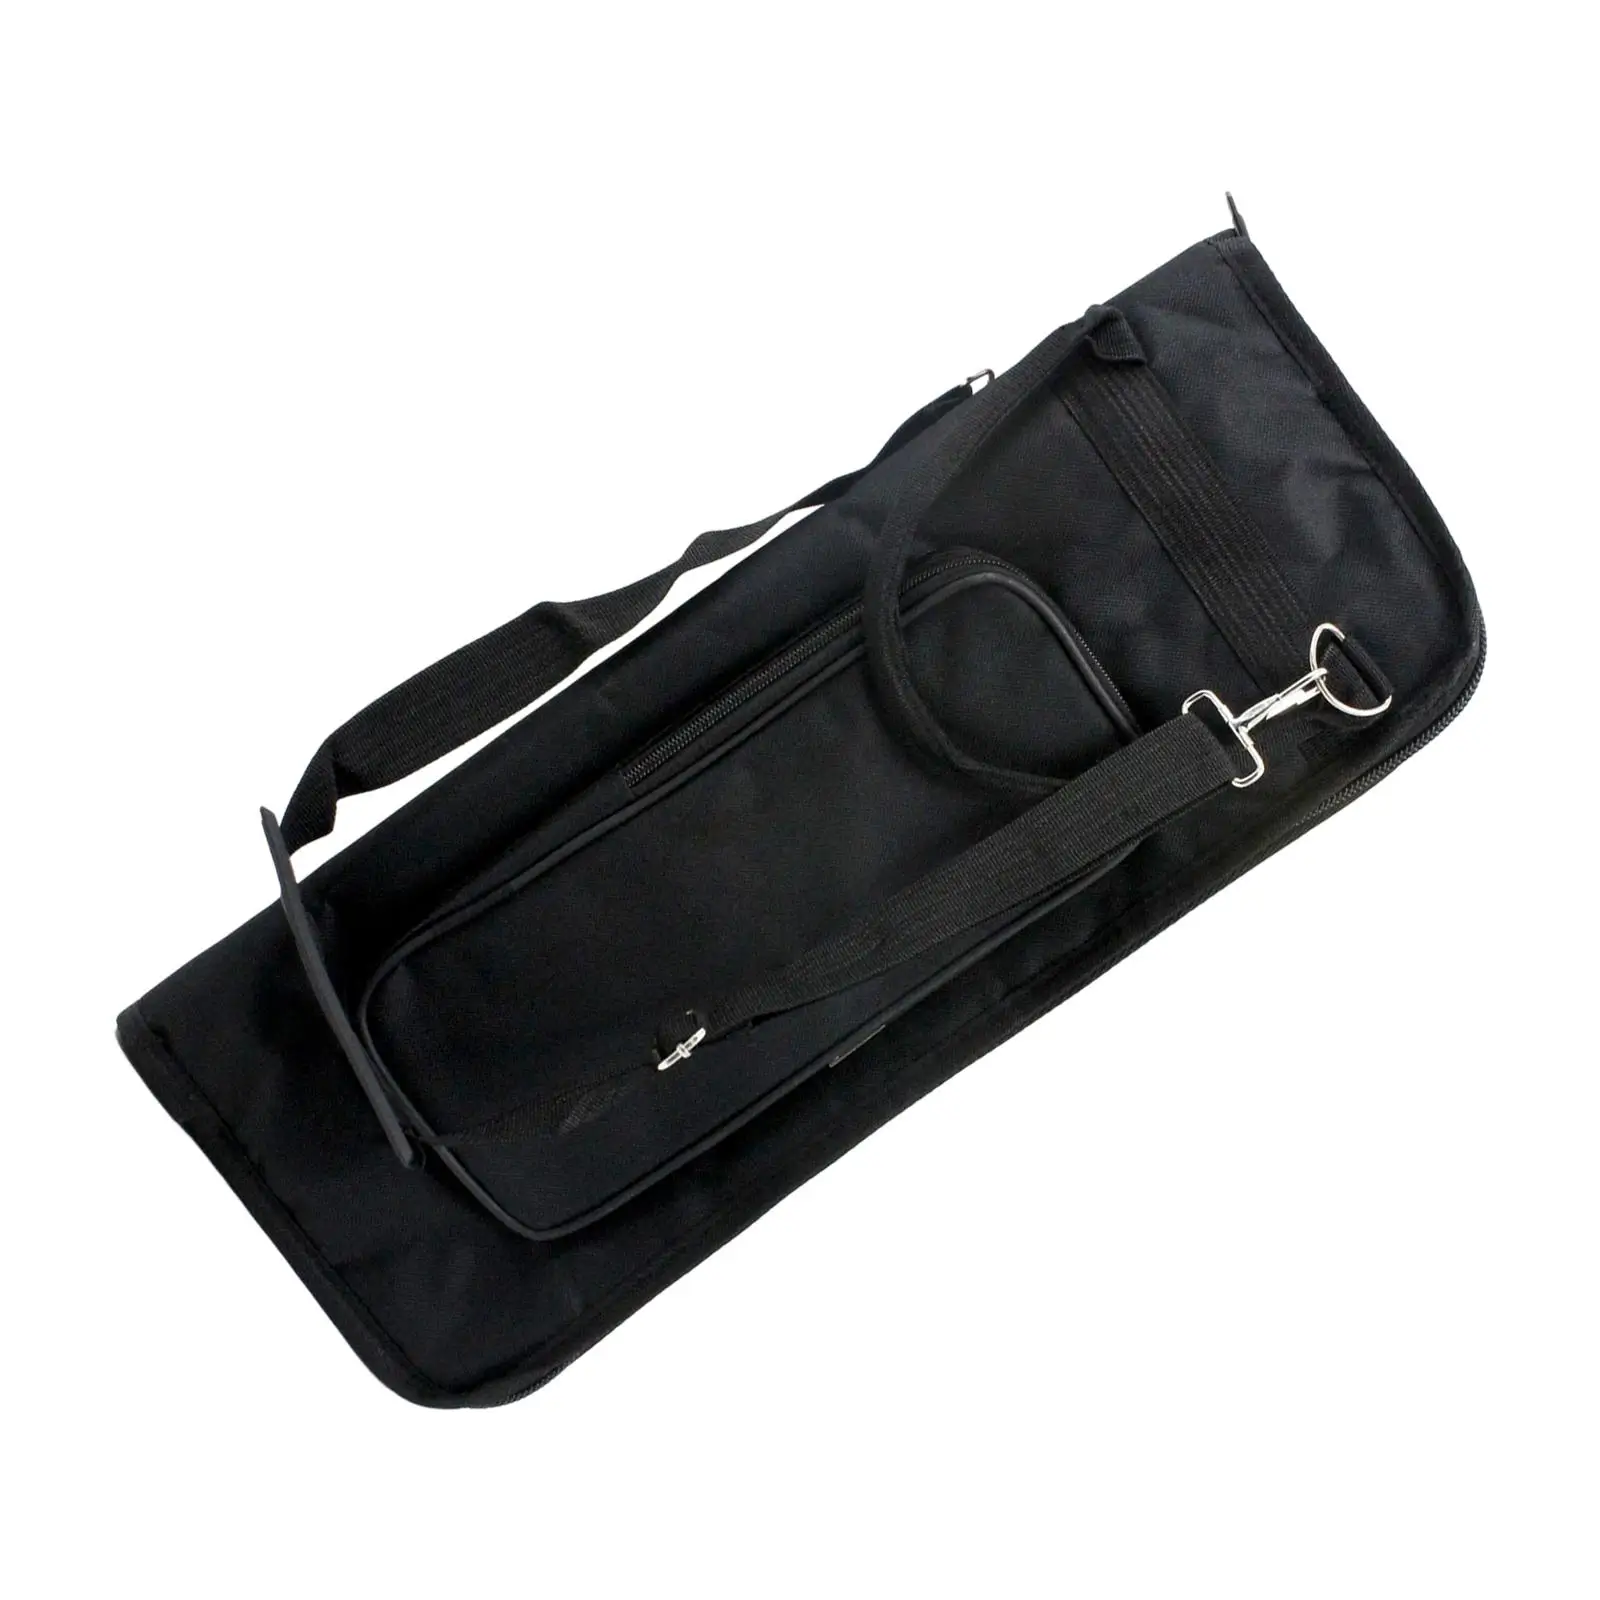 Drumstick Carry Case Oxford Cloth for Transportation Birthday Gifts Outside